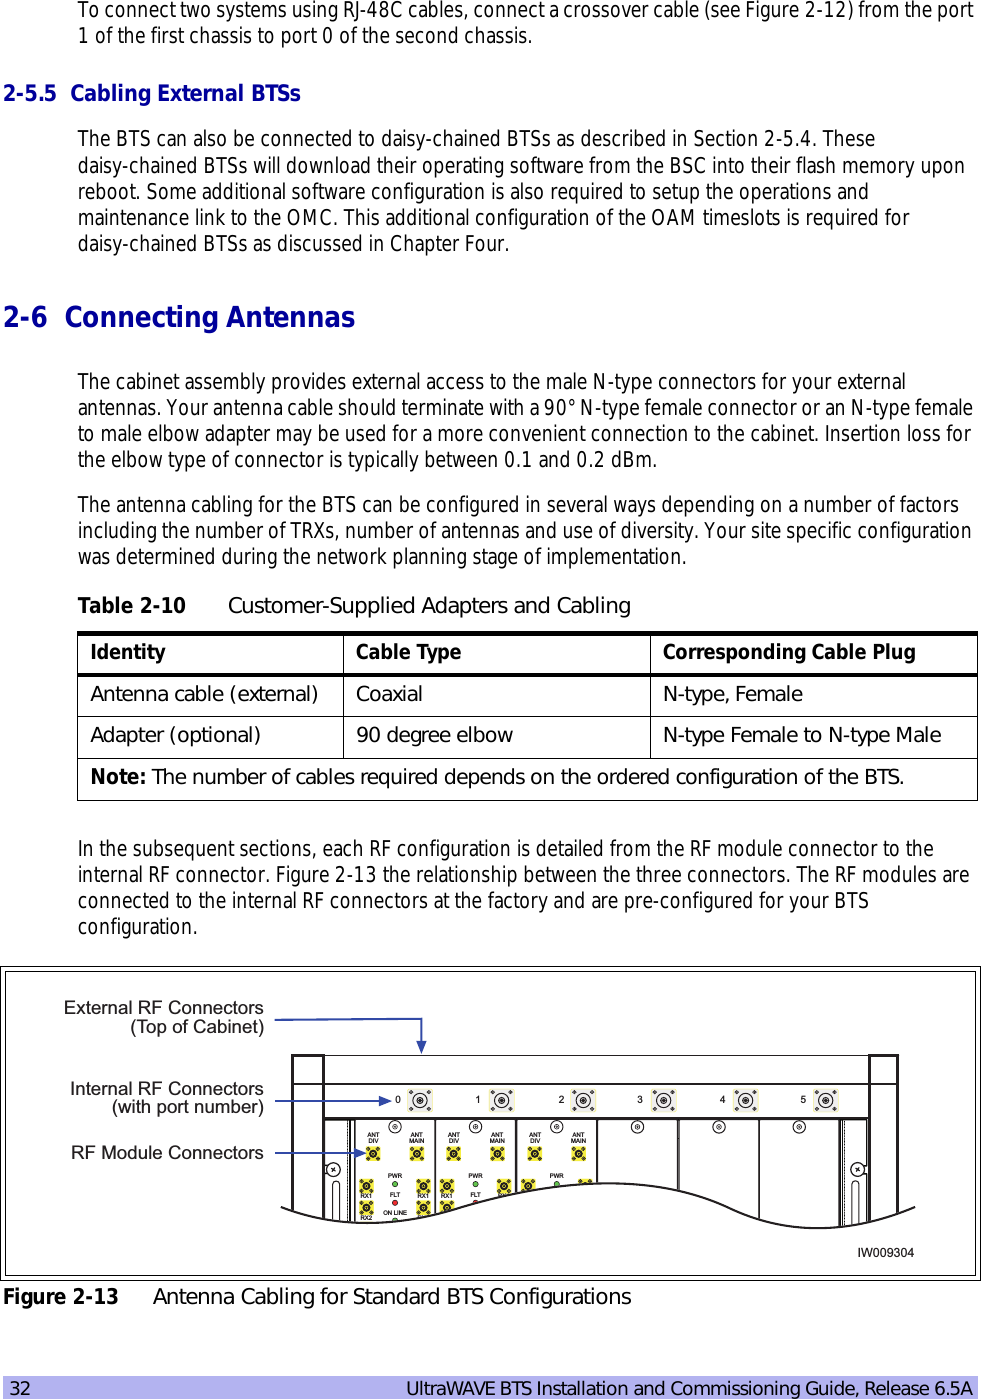 32   UltraWAVE BTS Installation and Commissioning Guide, Release 6.5ATo connect two systems using RJ-48C cables, connect a crossover cable (see Figure 2-12) from the port 1 of the first chassis to port 0 of the second chassis.2-5.5  Cabling External BTSsThe BTS can also be connected to daisy-chained BTSs as described in Section 2-5.4. These daisy-chained BTSs will download their operating software from the BSC into their flash memory upon reboot. Some additional software configuration is also required to setup the operations and maintenance link to the OMC. This additional configuration of the OAM timeslots is required for daisy-chained BTSs as discussed in Chapter Four.2-6  Connecting AntennasThe cabinet assembly provides external access to the male N-type connectors for your external antennas. Your antenna cable should terminate with a 90° N-type female connector or an N-type female to male elbow adapter may be used for a more convenient connection to the cabinet. Insertion loss for the elbow type of connector is typically between 0.1 and 0.2 dBm.The antenna cabling for the BTS can be configured in several ways depending on a number of factors including the number of TRXs, number of antennas and use of diversity. Your site specific configuration was determined during the network planning stage of implementation.In the subsequent sections, each RF configuration is detailed from the RF module connector to the internal RF connector. Figure 2-13 the relationship between the three connectors. The RF modules are connected to the internal RF connectors at the factory and are pre-configured for your BTS configuration.Table 2-10 Customer-Supplied Adapters and CablingIdentity Cable Type Corresponding Cable PlugAntenna cable (external) Coaxial N-type, Female Adapter (optional) 90 degree elbow N-type Female to N-type MaleNote: The number of cables required depends on the ordered configuration of the BTS.Figure 2-13 Antenna Cabling for Standard BTS ConfigurationsInternal RF Connectors(with port number)RF Module ConnectorsExternal RF Connectors(Top of Cabinet)ANTDIVANTMAINPWRFLTON LINEONOFFRX1RX2RX3RX4RX1RX2RX3RX4ANTDIVANTMAINPWRFLTON LINEONOFFRX1RX2RX3RX4RX1RX2RX3RX4ANTDIVANTMAINPWRFLTON LINEONOFFRX1RX2RX3RX4RX1RX2RX3RX401 23 54IW009304